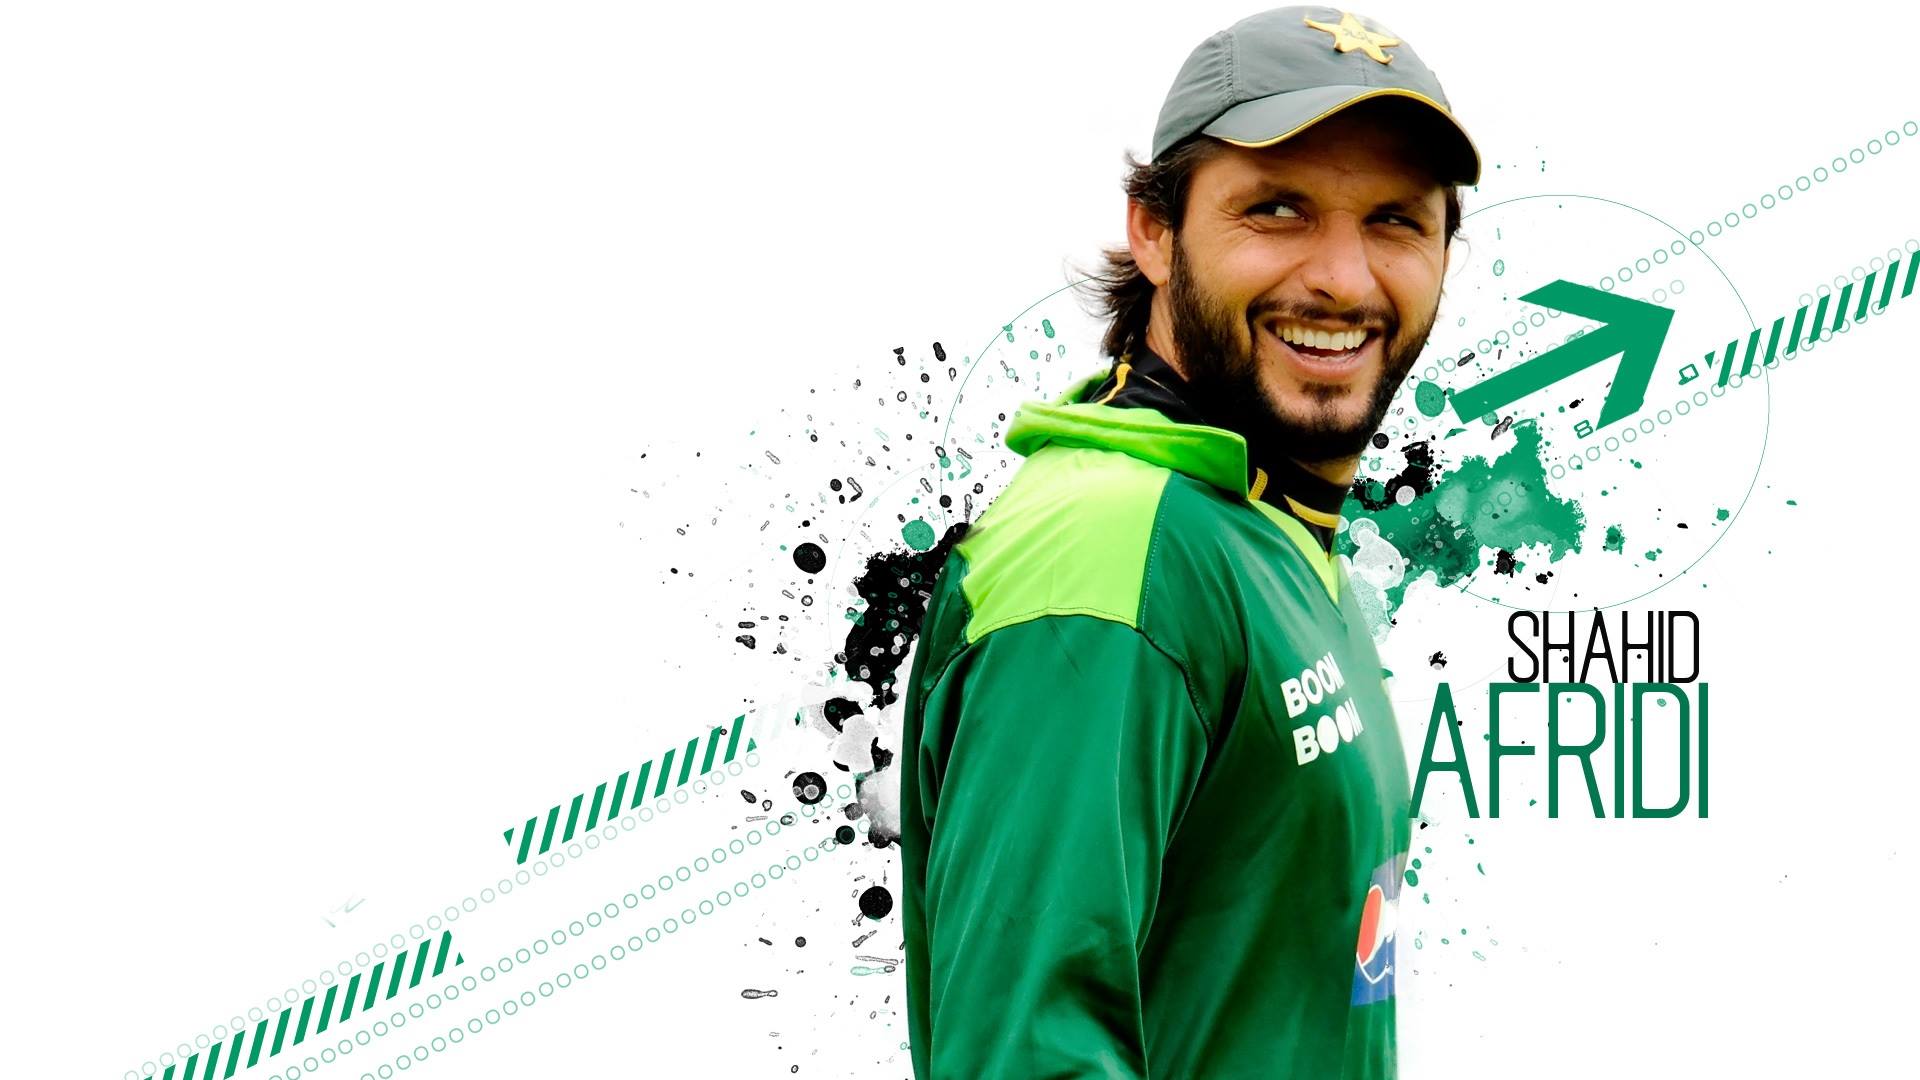 afridi_wallpapers_020